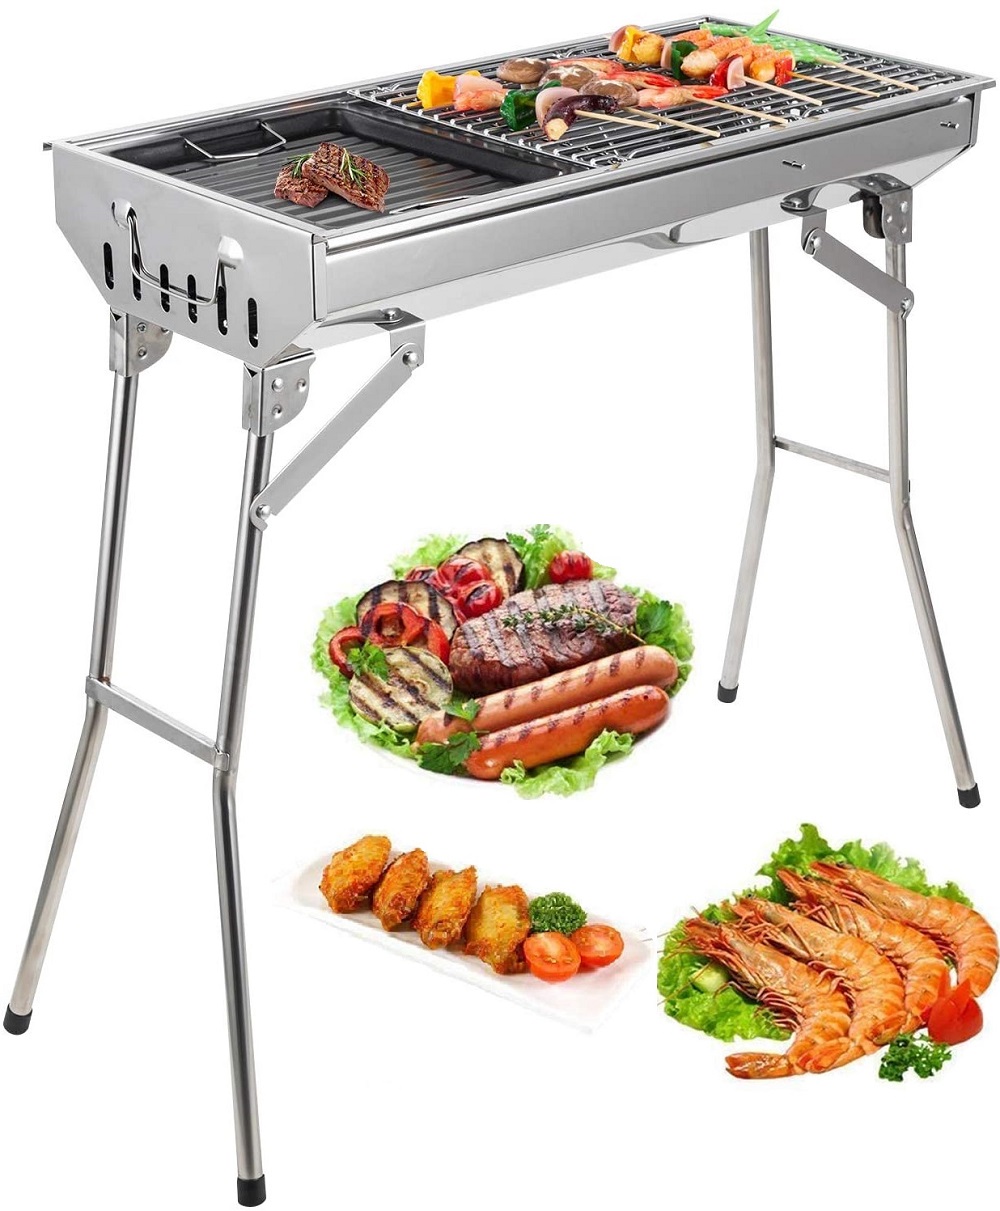 Charcoal BBQ Grill Outdoor Grill, SEGMART 28" Portable BBQ Charcoal Grill Lightweight BBQ Grill, Small Portable Charcoal Grill w/ Handle & Adjustable Grate, Stainless Steel, Easy Clean, Silver, H390 - image 2 of 12